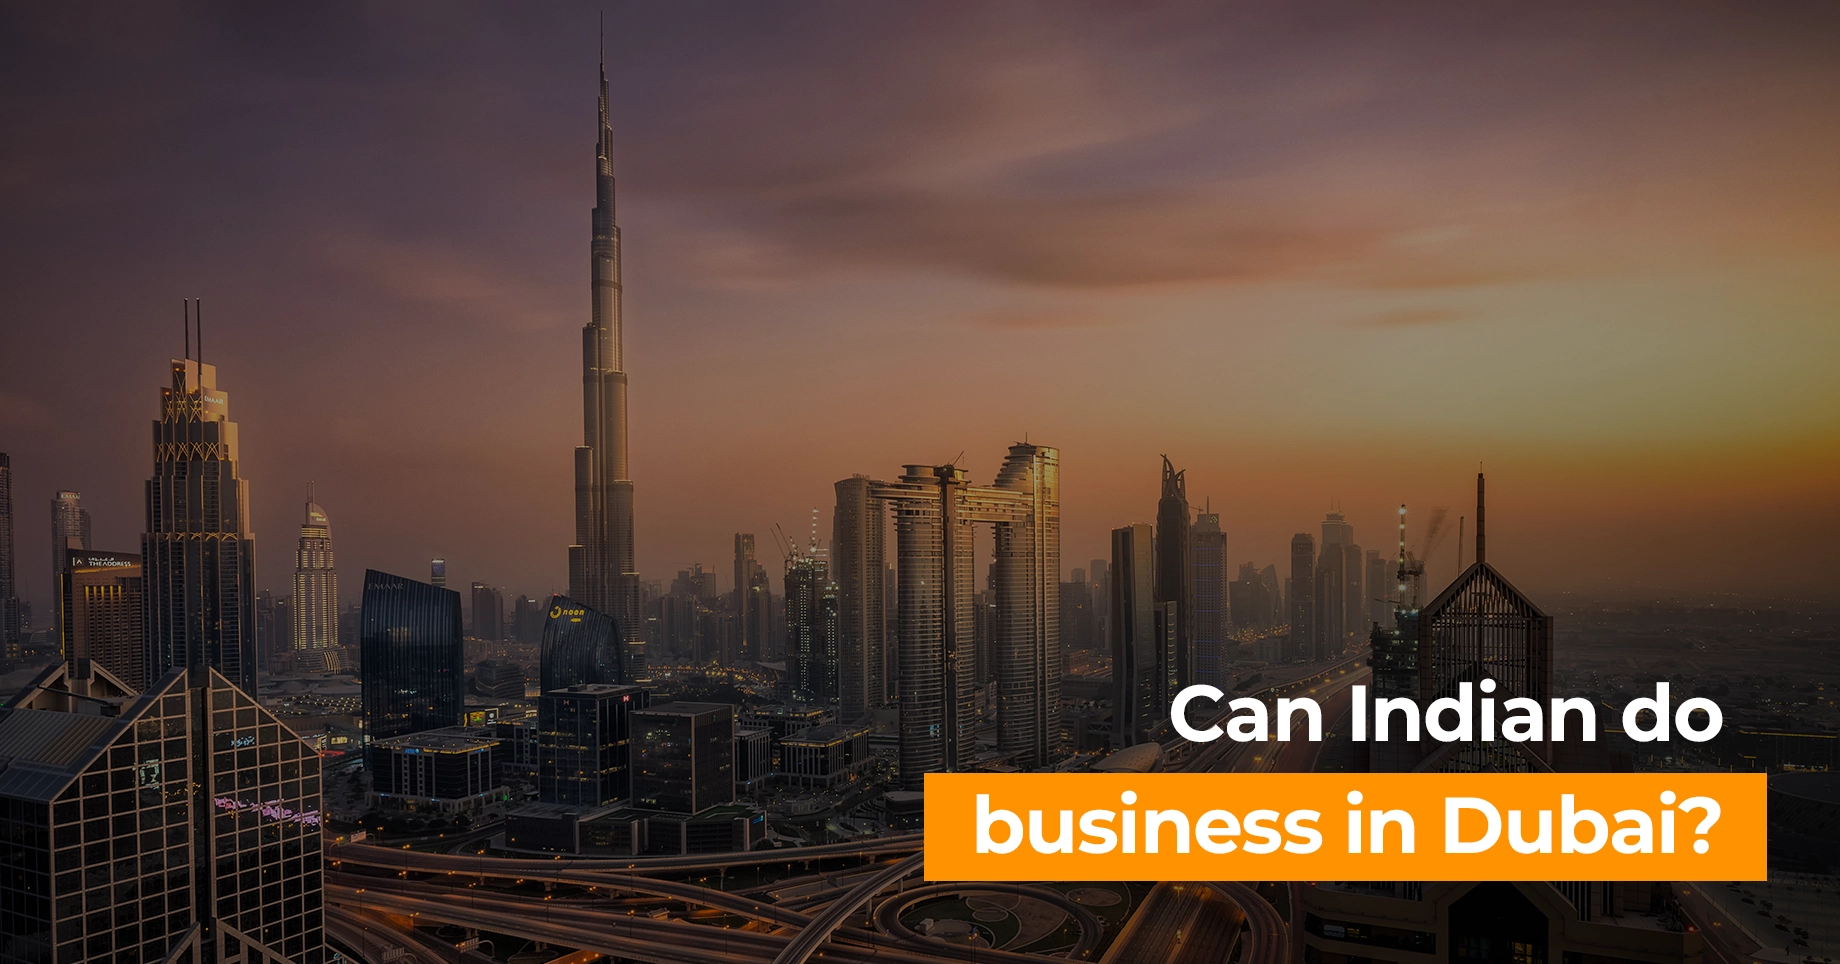 Can Indian do business in Dubai